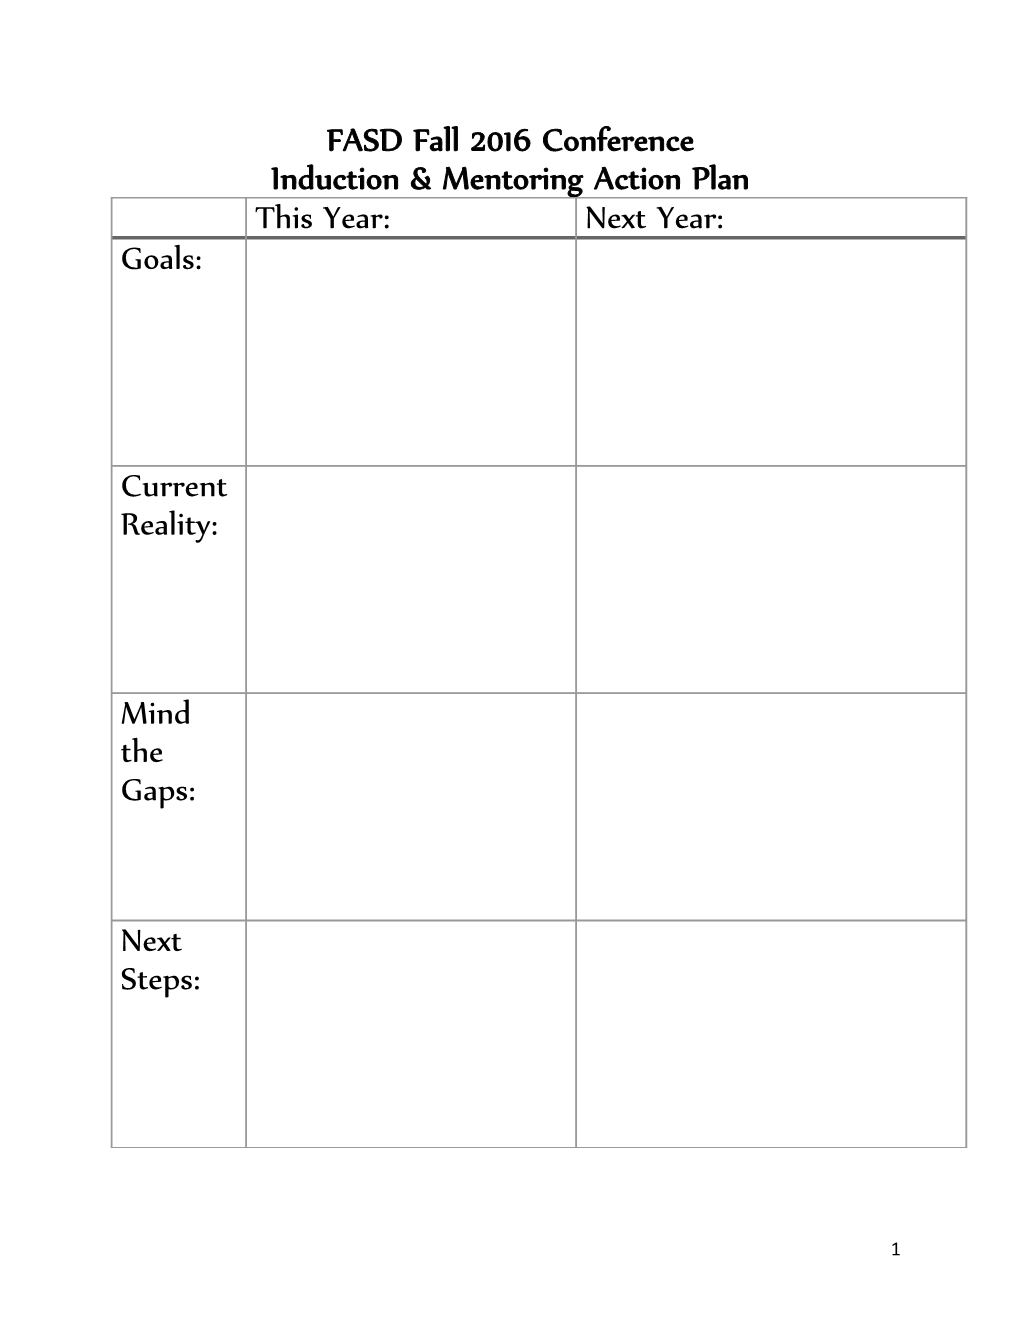 Induction & Mentoring Action Plan